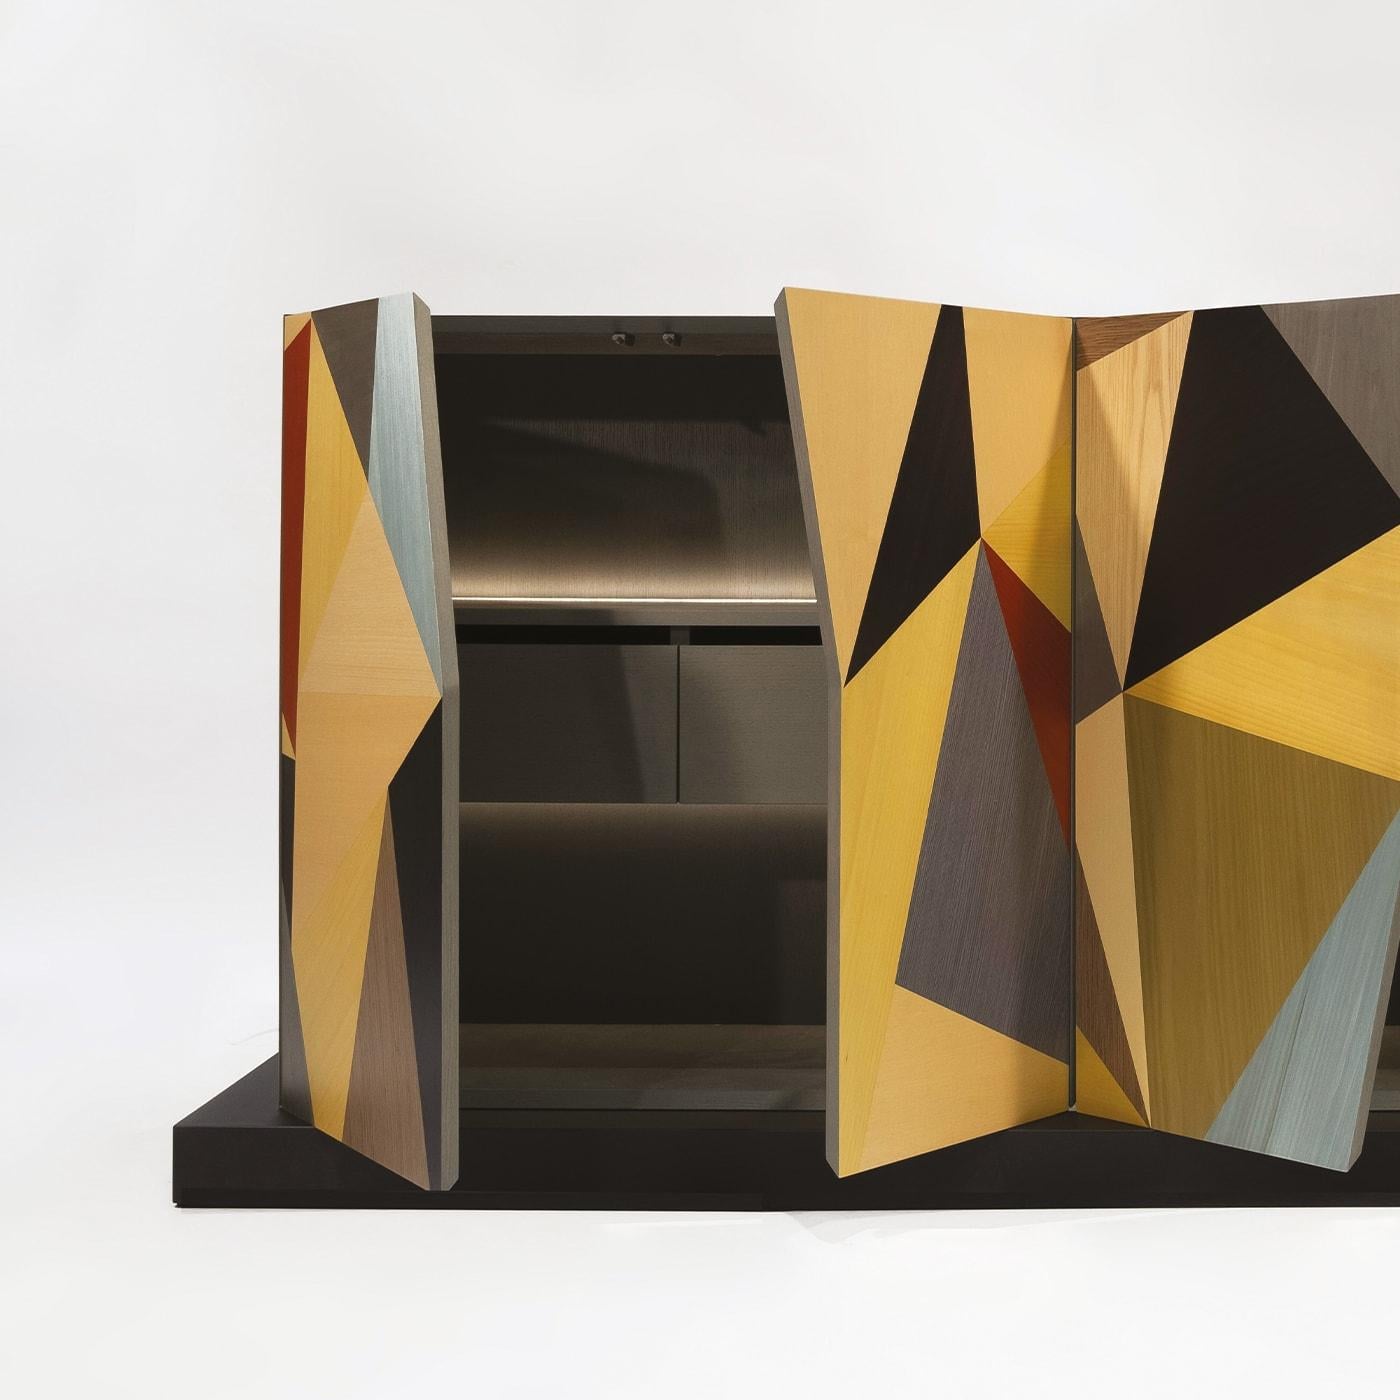 Enna totemic sideboard, inspired from Sicily's modern and contemporary art, can be placed anywhere due to its five visible sides. The polychrome wood marquetry with its minimalist design recalls both for the early 20th century avant-garde movements